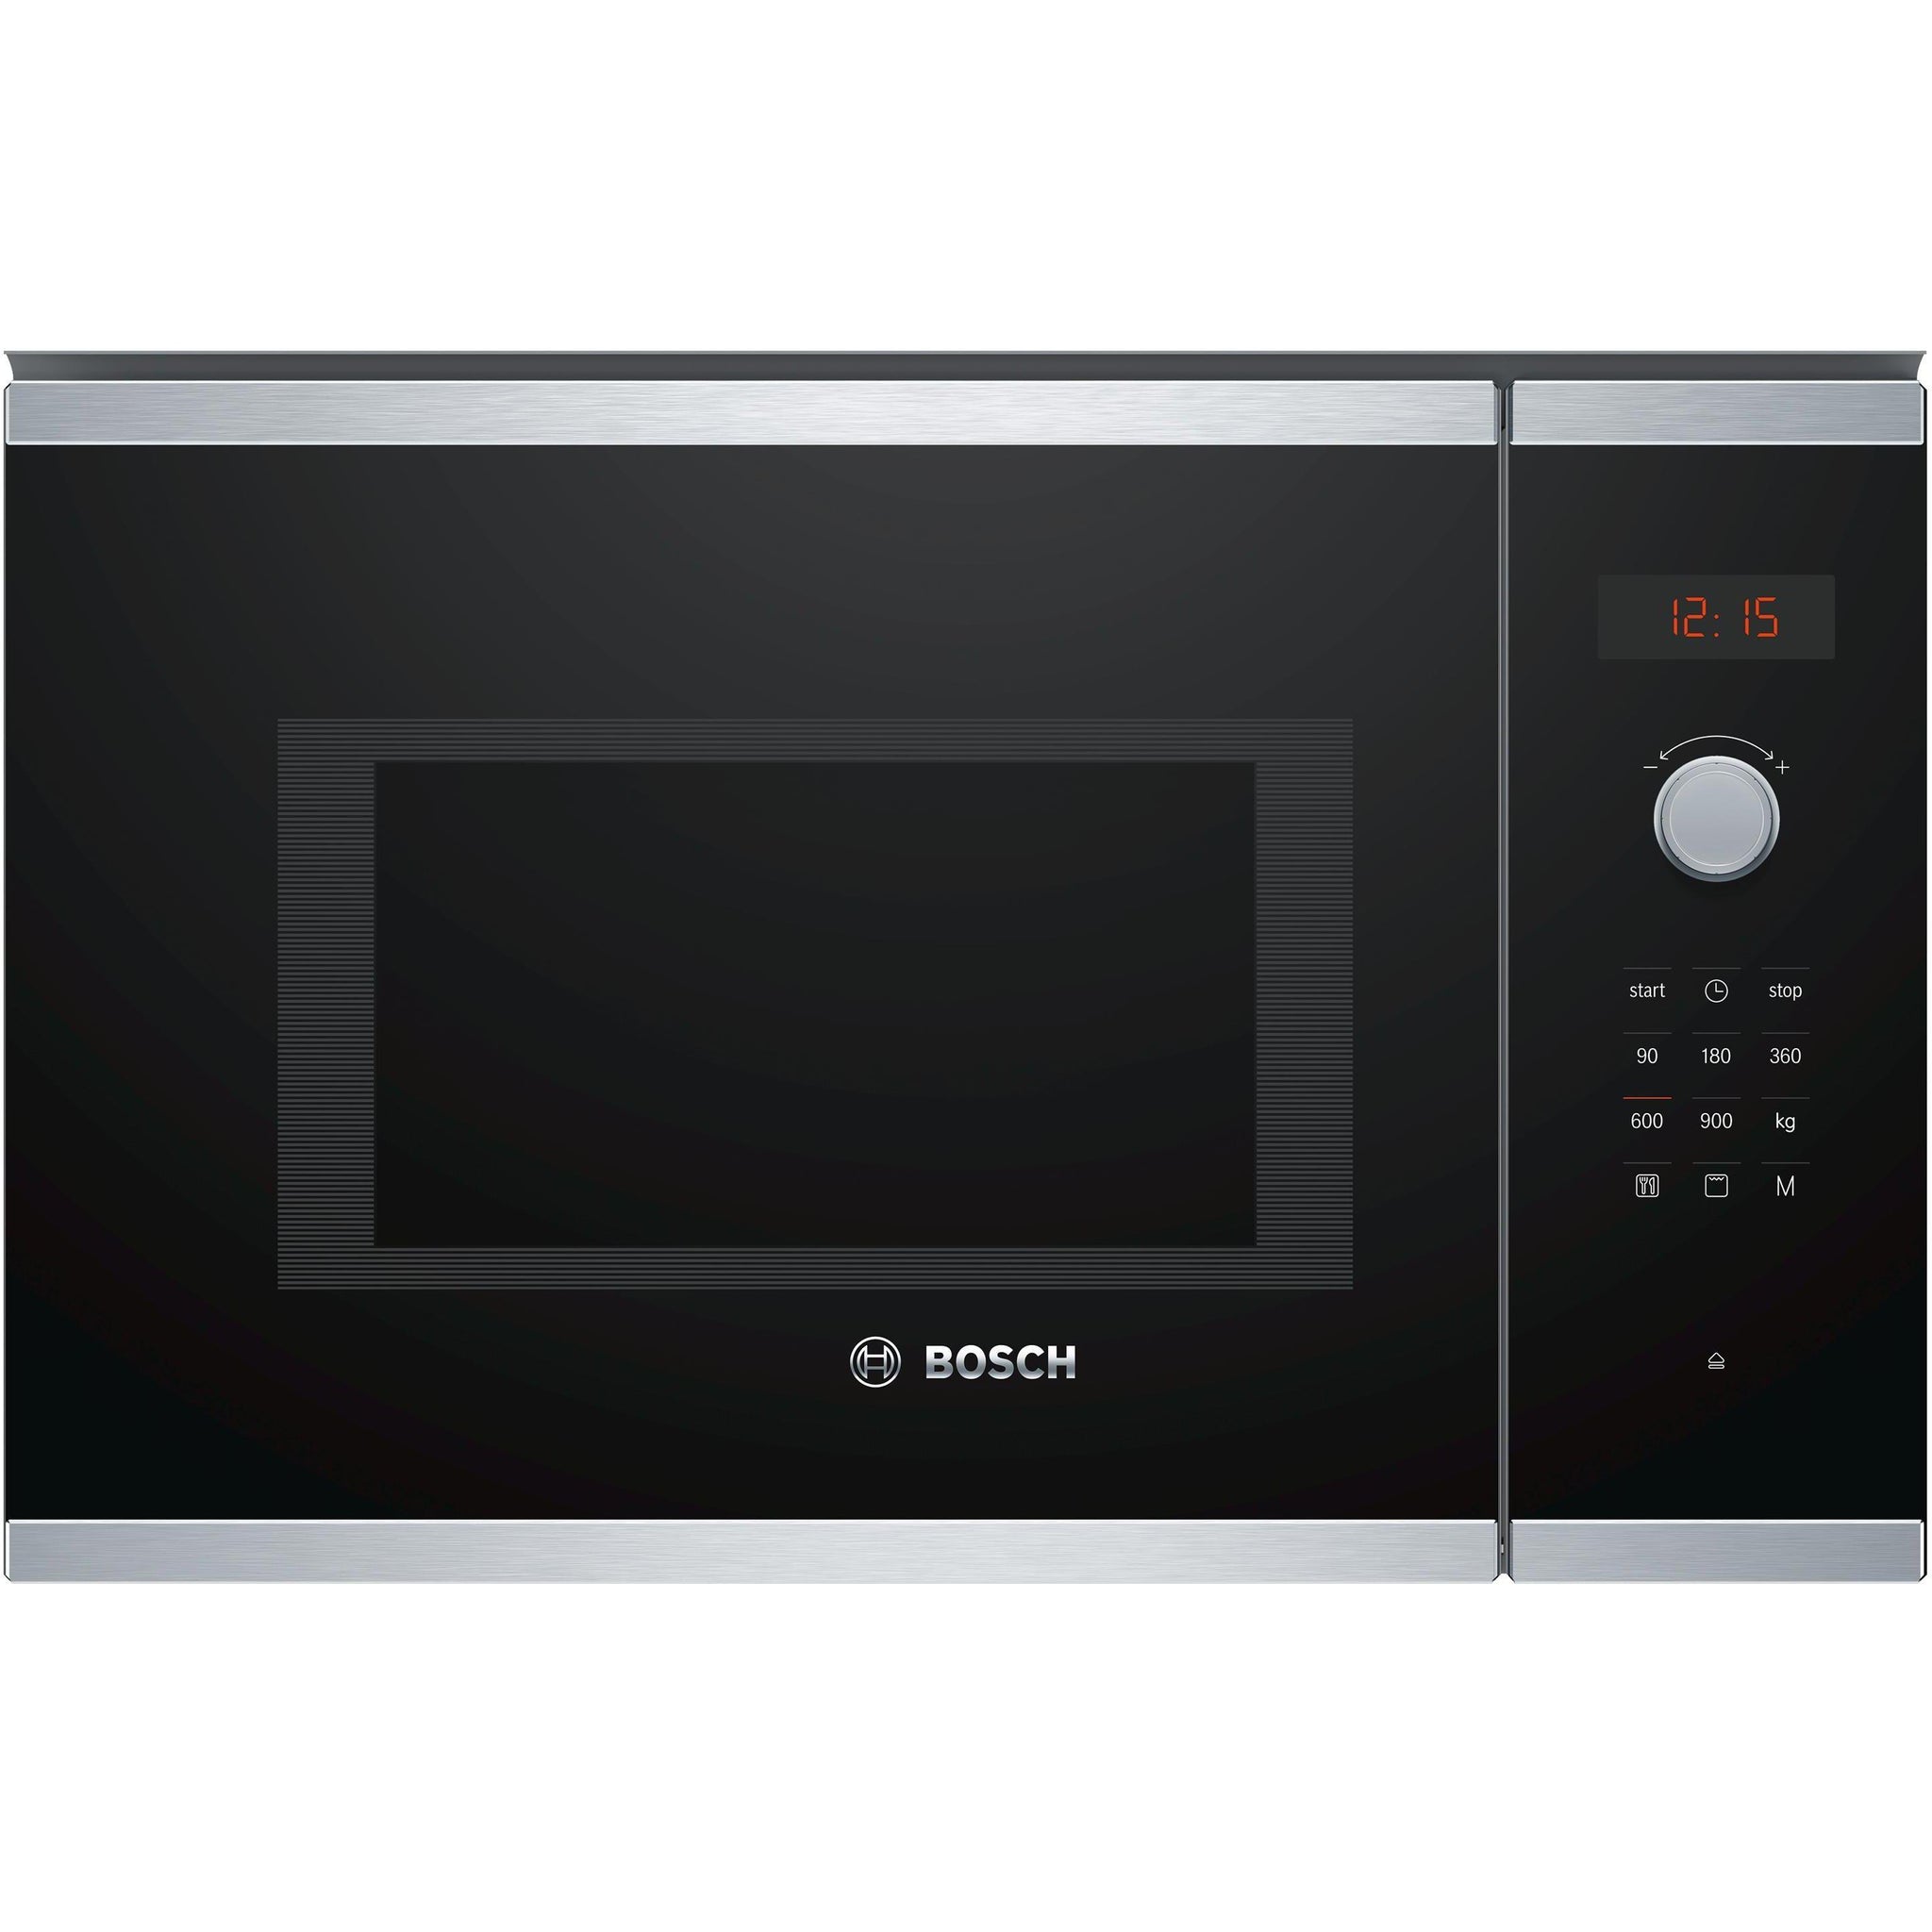 Bosch Serie 4 Bel553ms0b Builtin Microwave Brushed Steel Delivery Within 710 Days